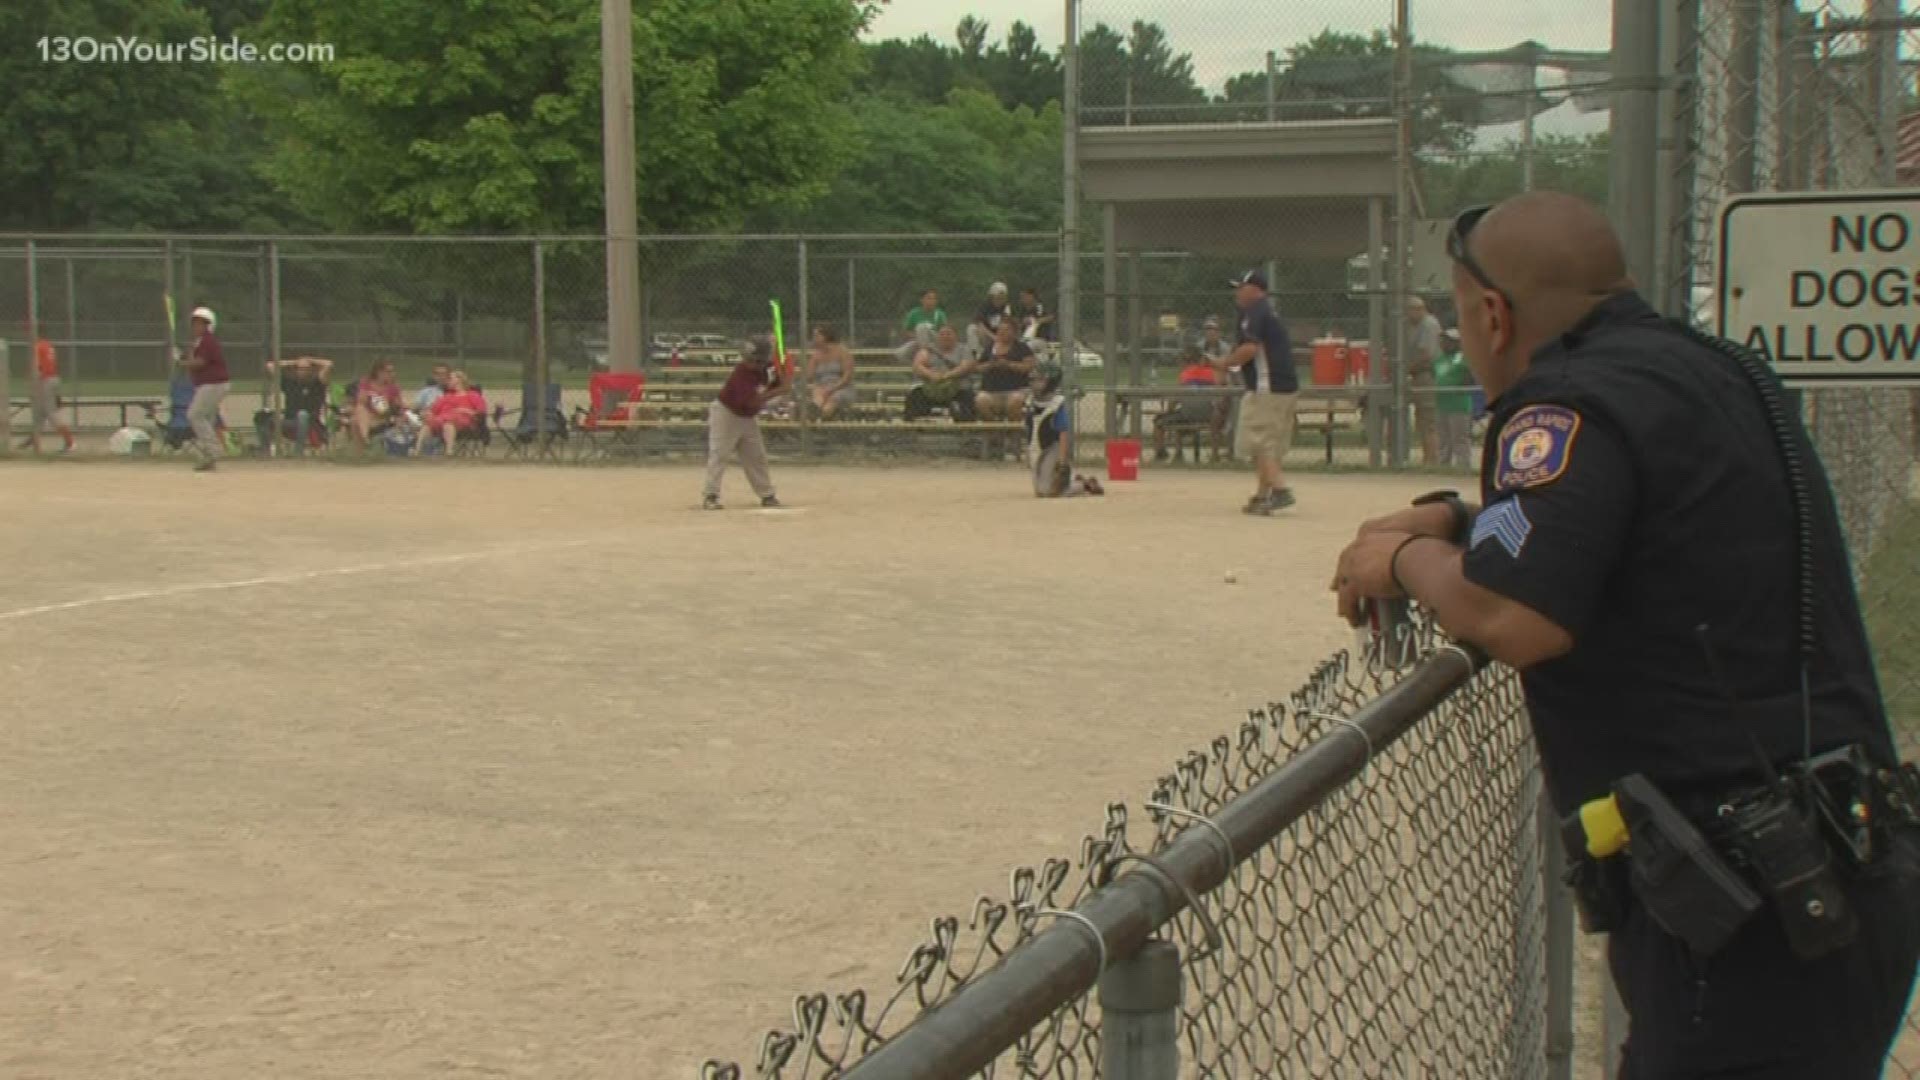 Youth baseball league coached by GRPD officers wraps up season